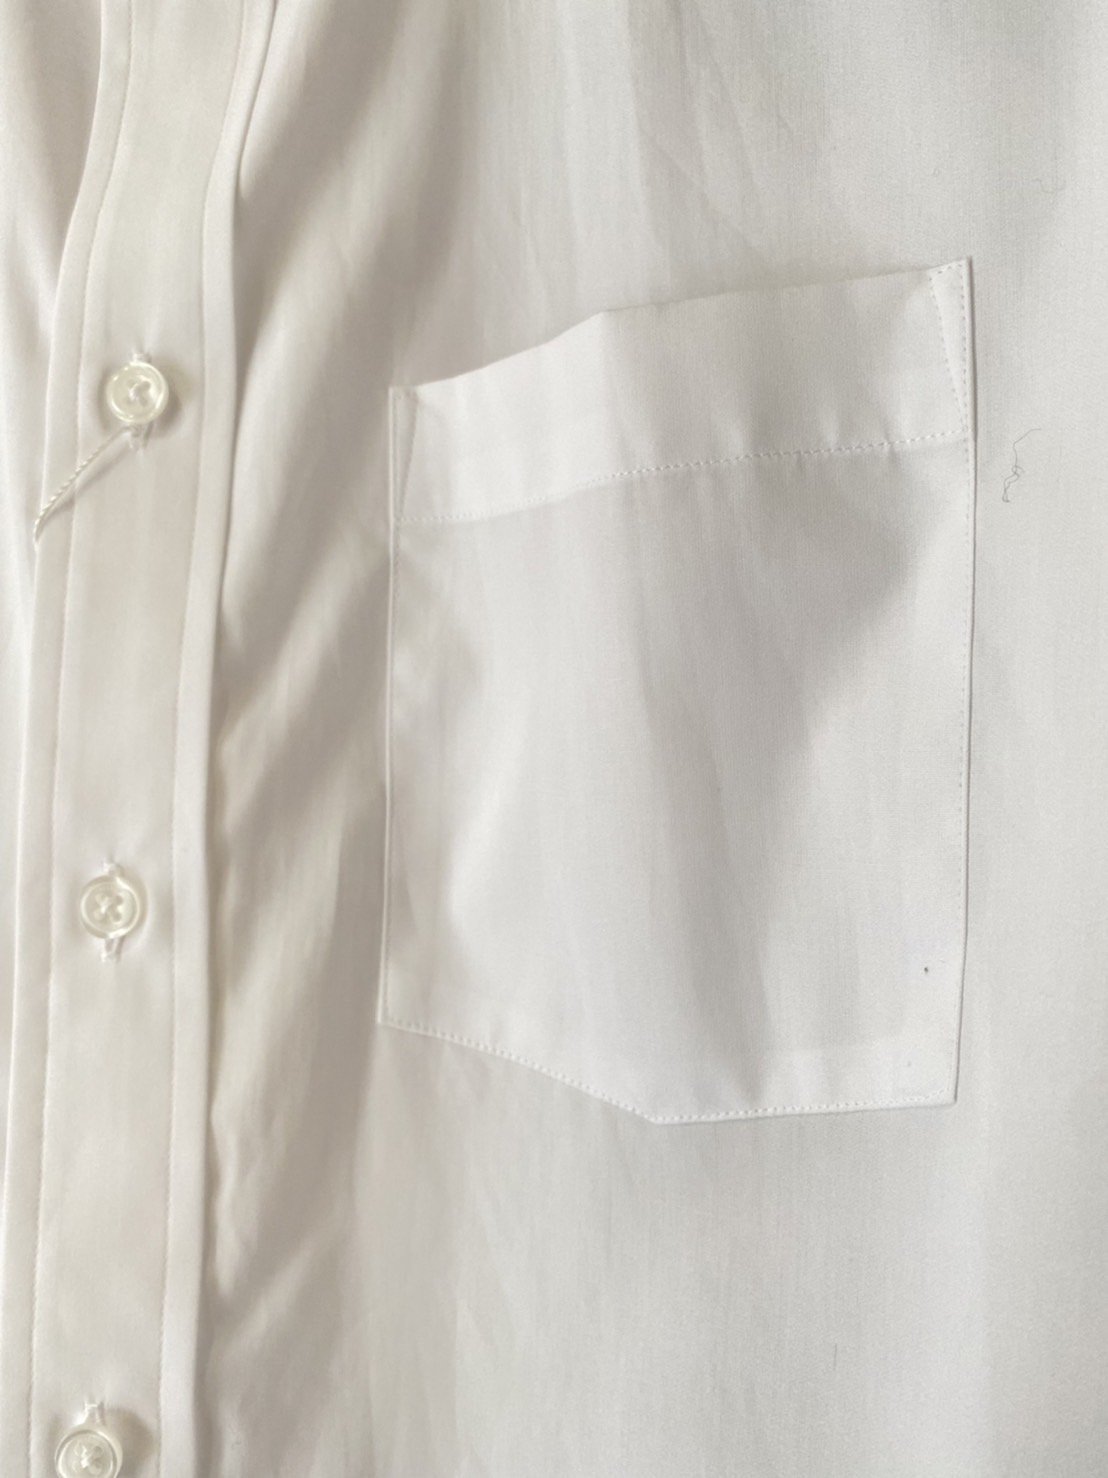 ALLEGE<br />Standard Shirt / WHITE<img class='new_mark_img2' src='https://img.shop-pro.jp/img/new/icons14.gif' style='border:none;display:inline;margin:0px;padding:0px;width:auto;' />